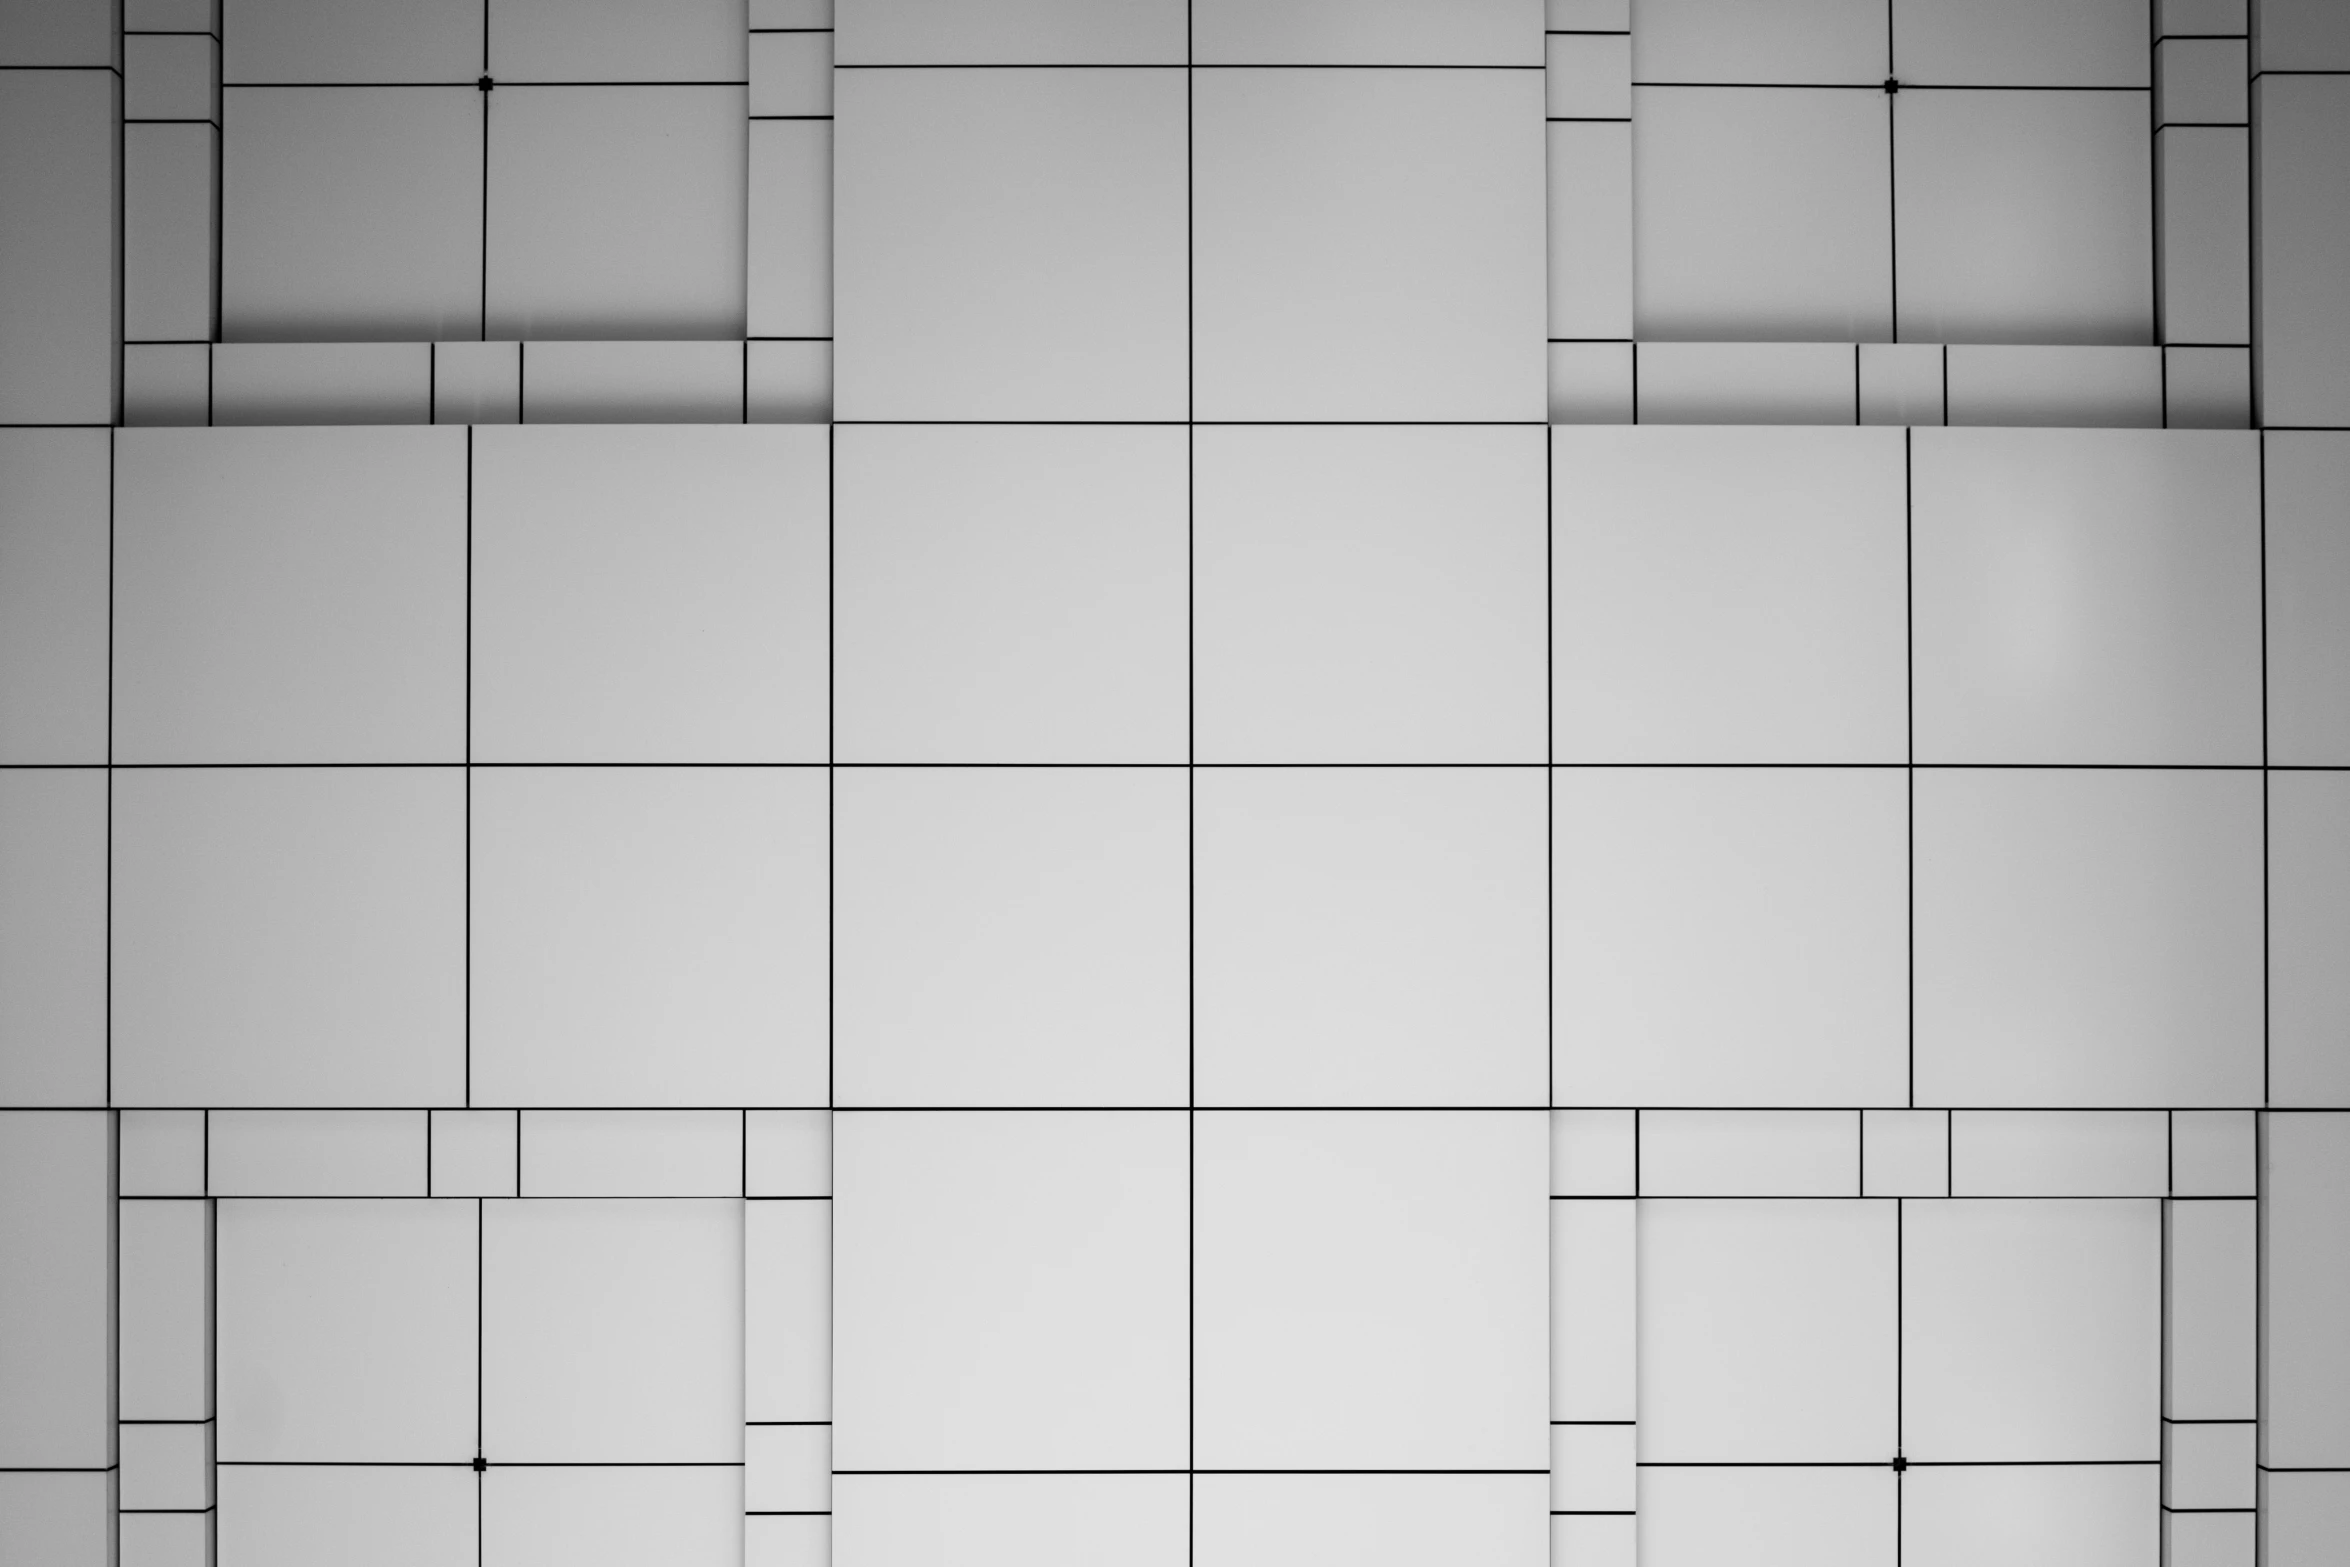 black and white tiles arranged as wall pattern